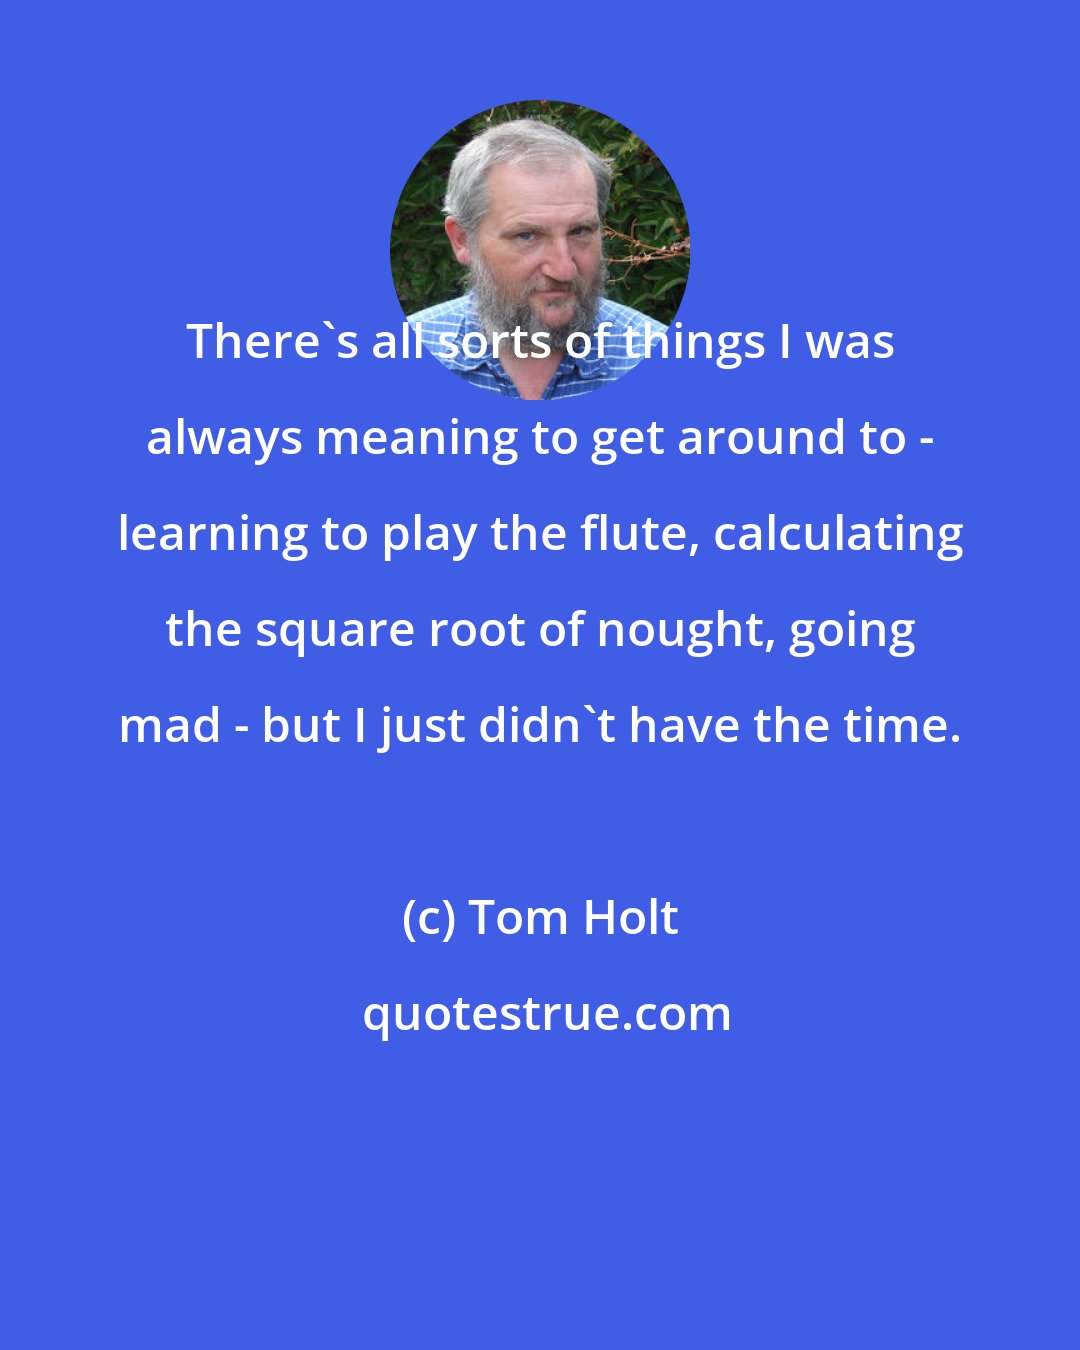 Tom Holt: There's all sorts of things I was always meaning to get around to - learning to play the flute, calculating the square root of nought, going mad - but I just didn't have the time.